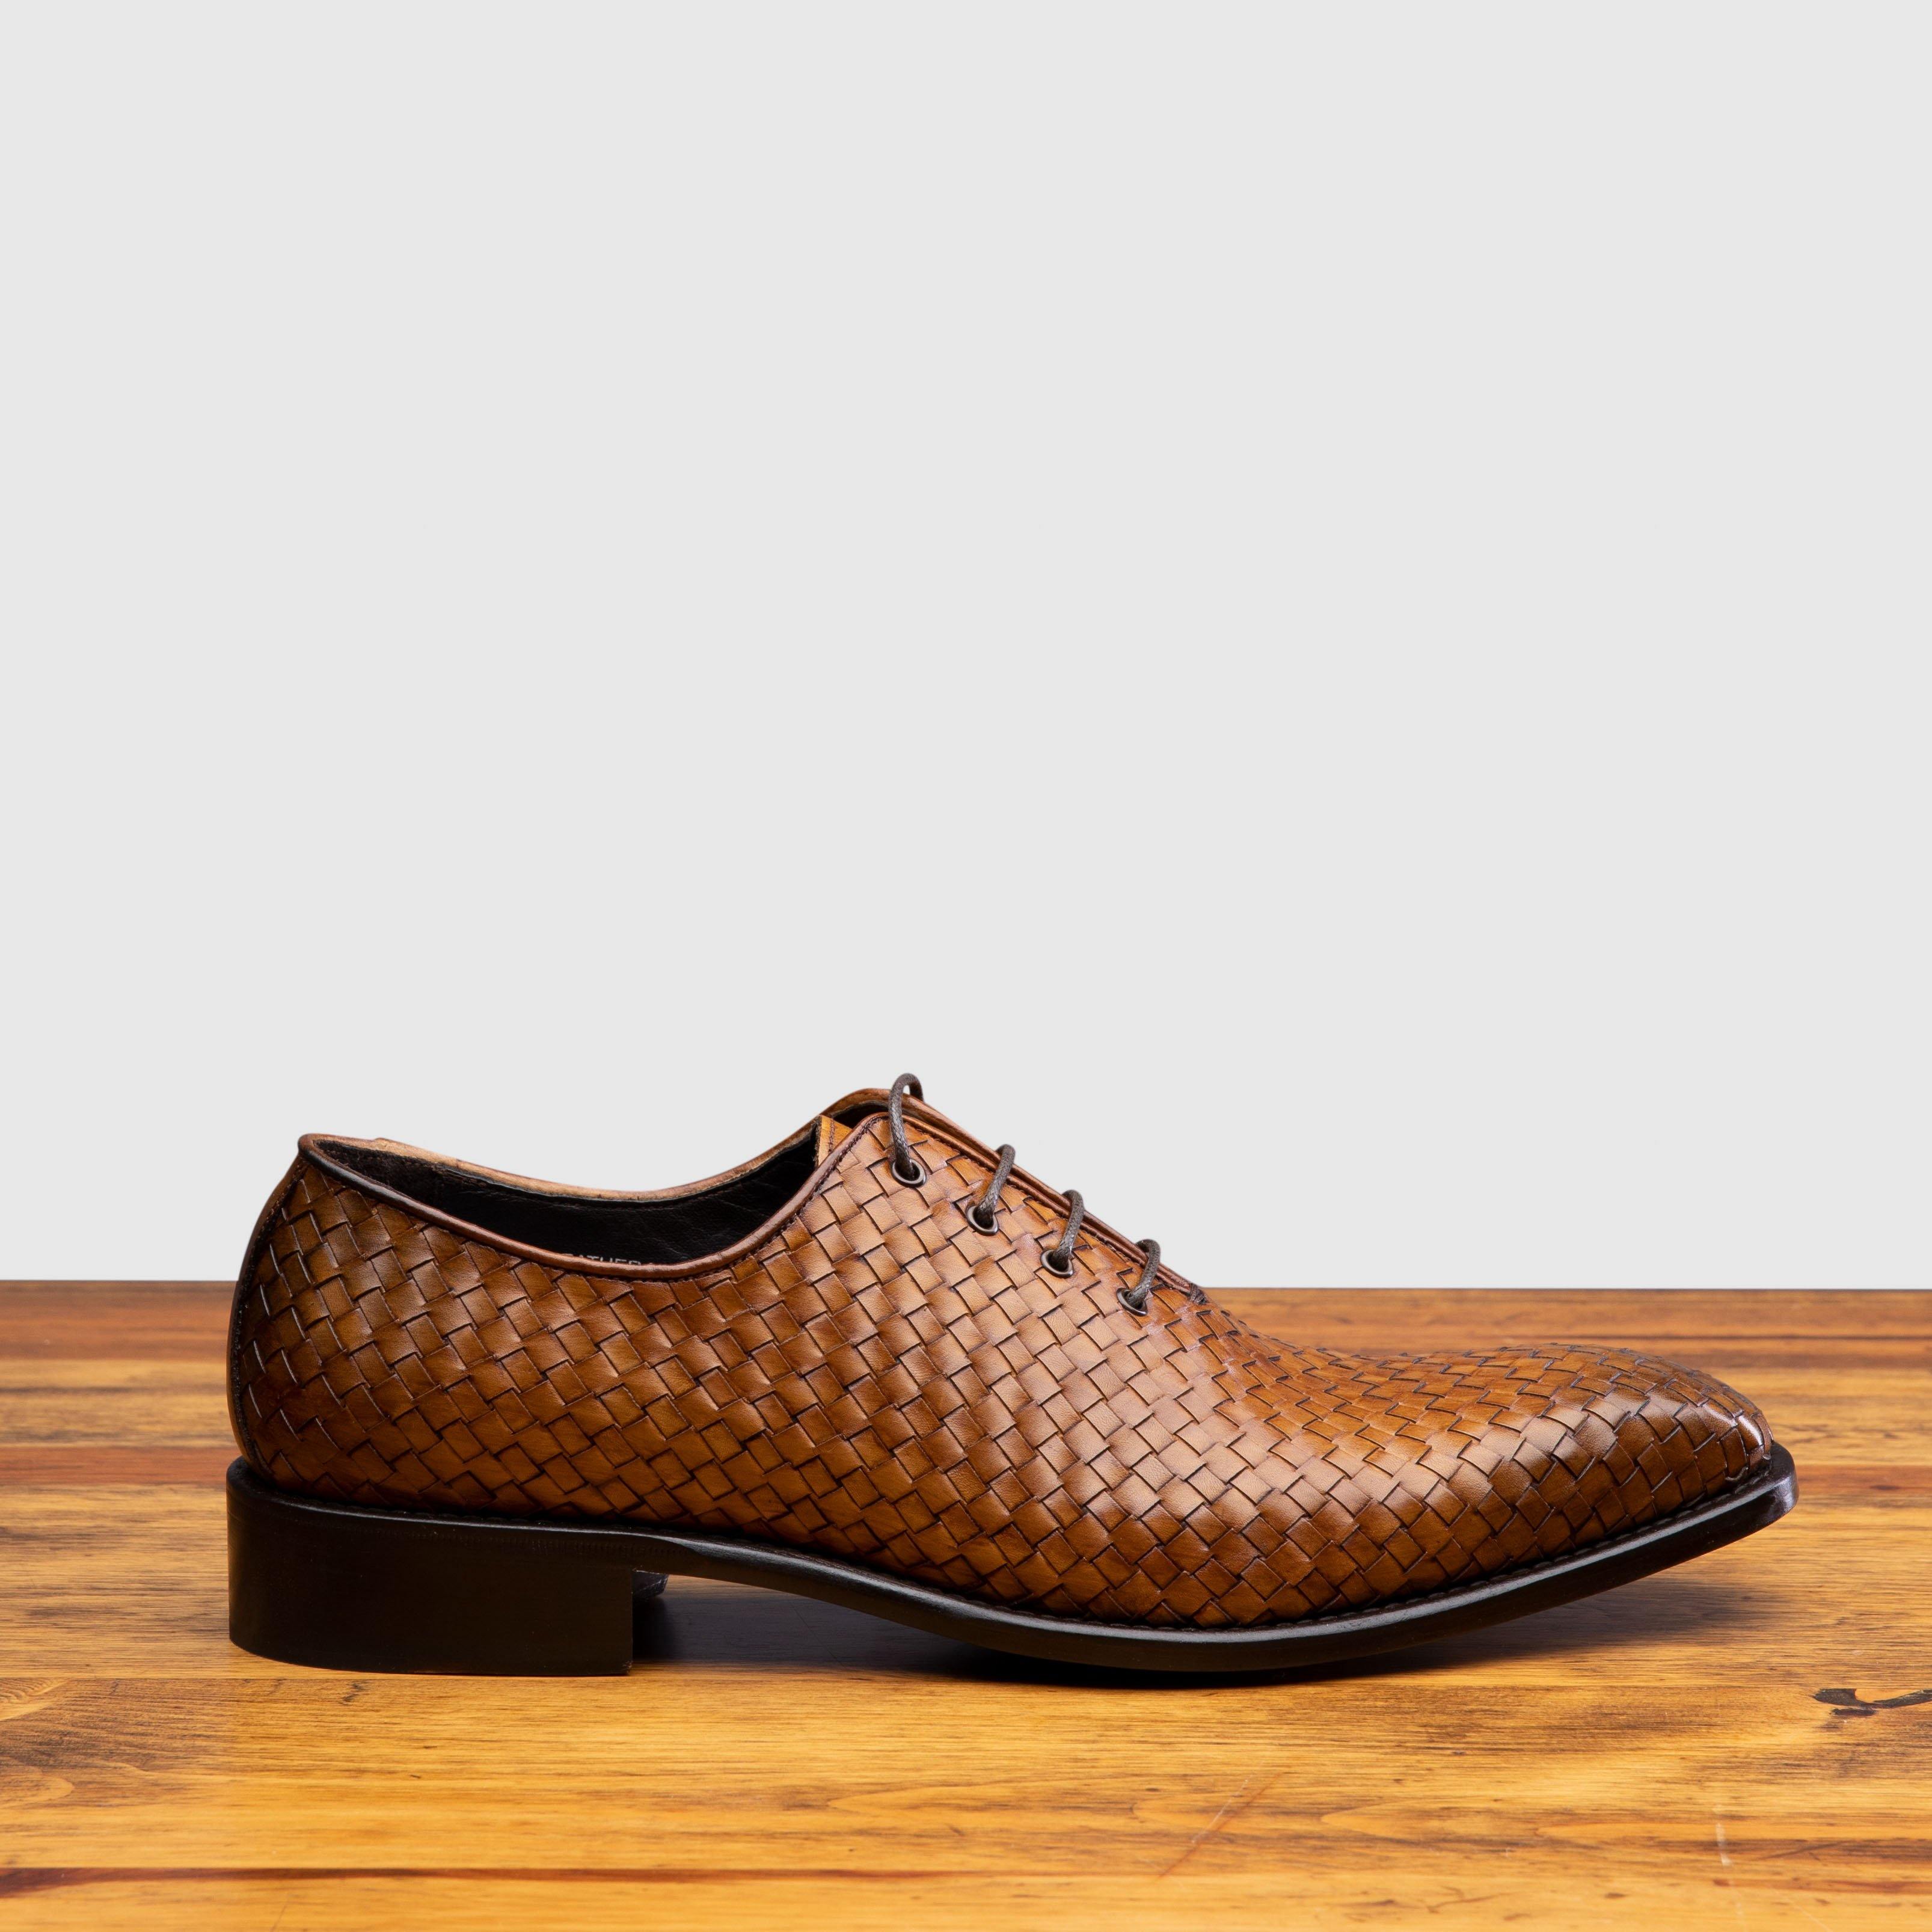 Side profile of 5373 Calzoleria Toscana Chestnut Woven Lace-Up on top of a wooden table